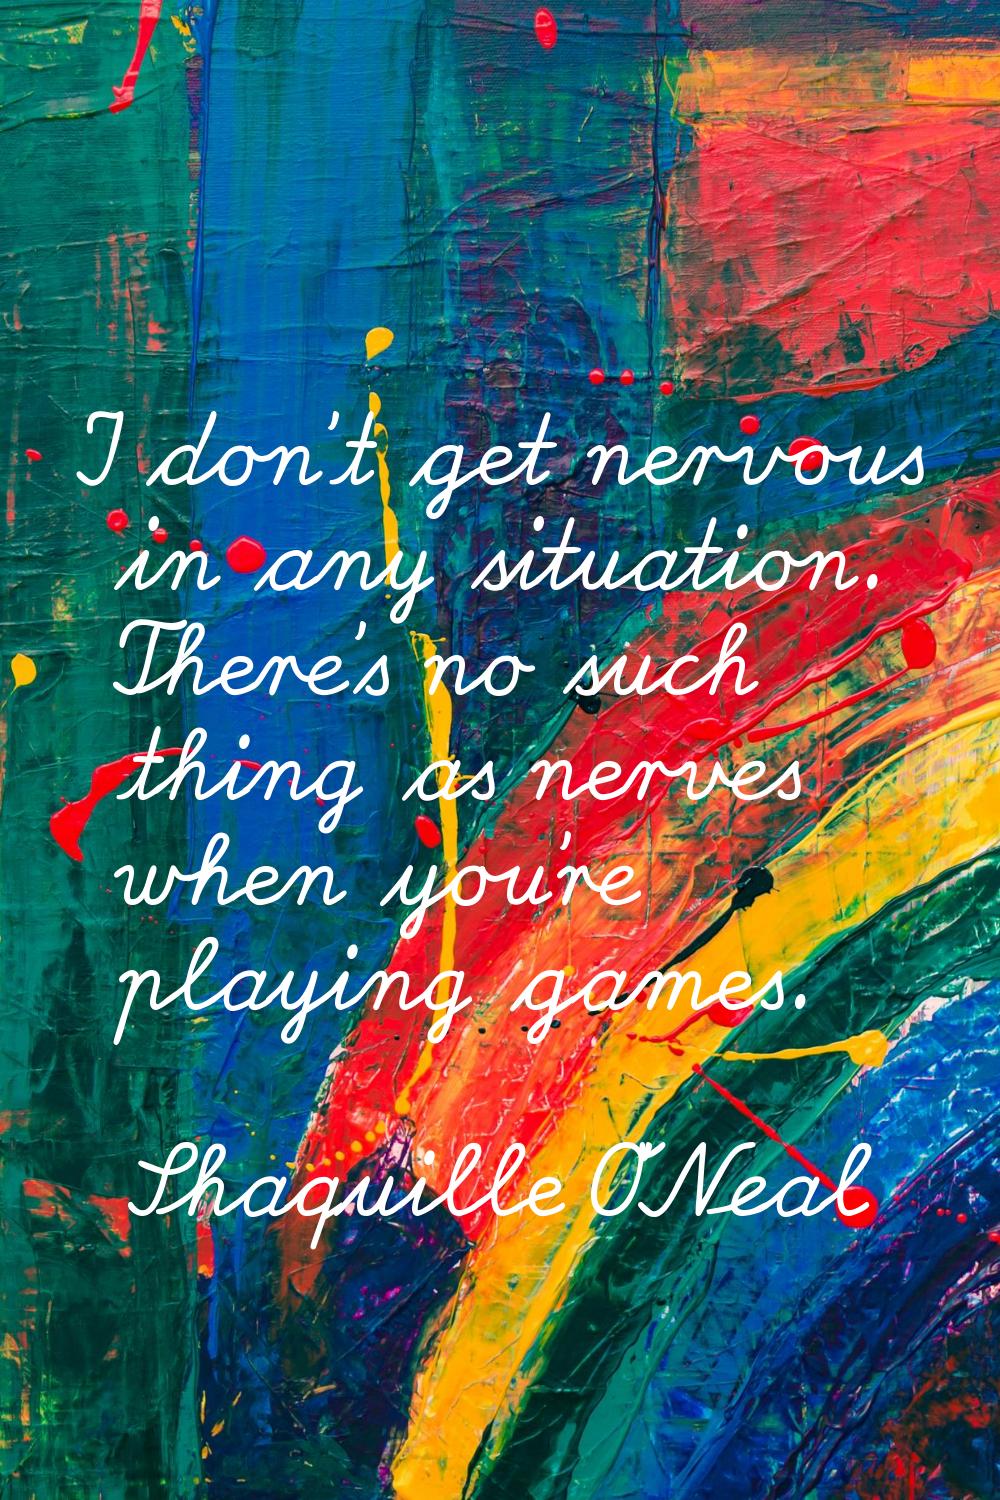 I don't get nervous in any situation. There's no such thing as nerves when you're playing games.